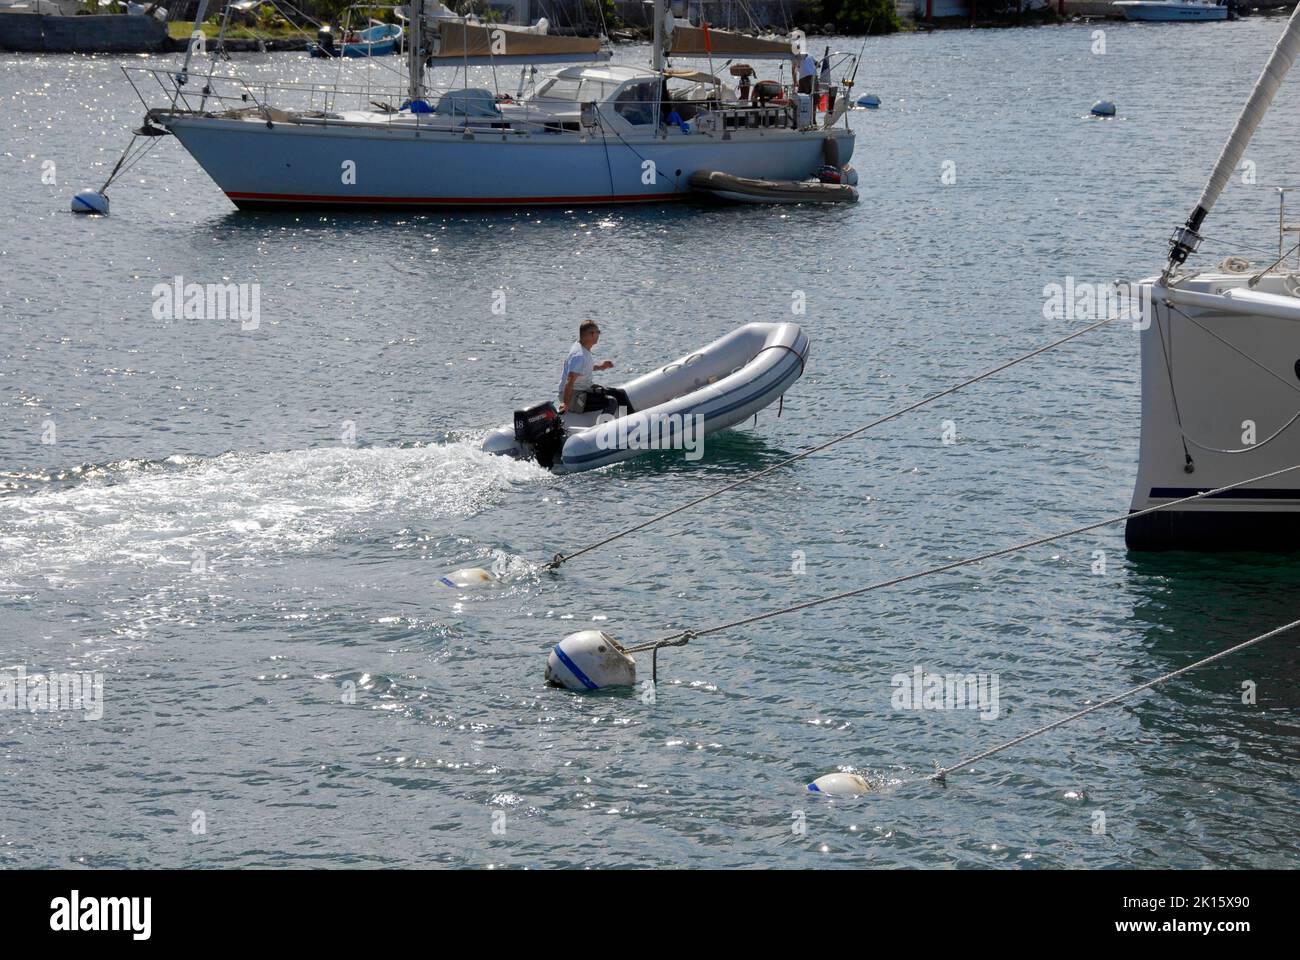 Man in small inflatable boat with outboard engine on Simpson Bay Lagoon, Saint Martin, Caribbean Stock Photo